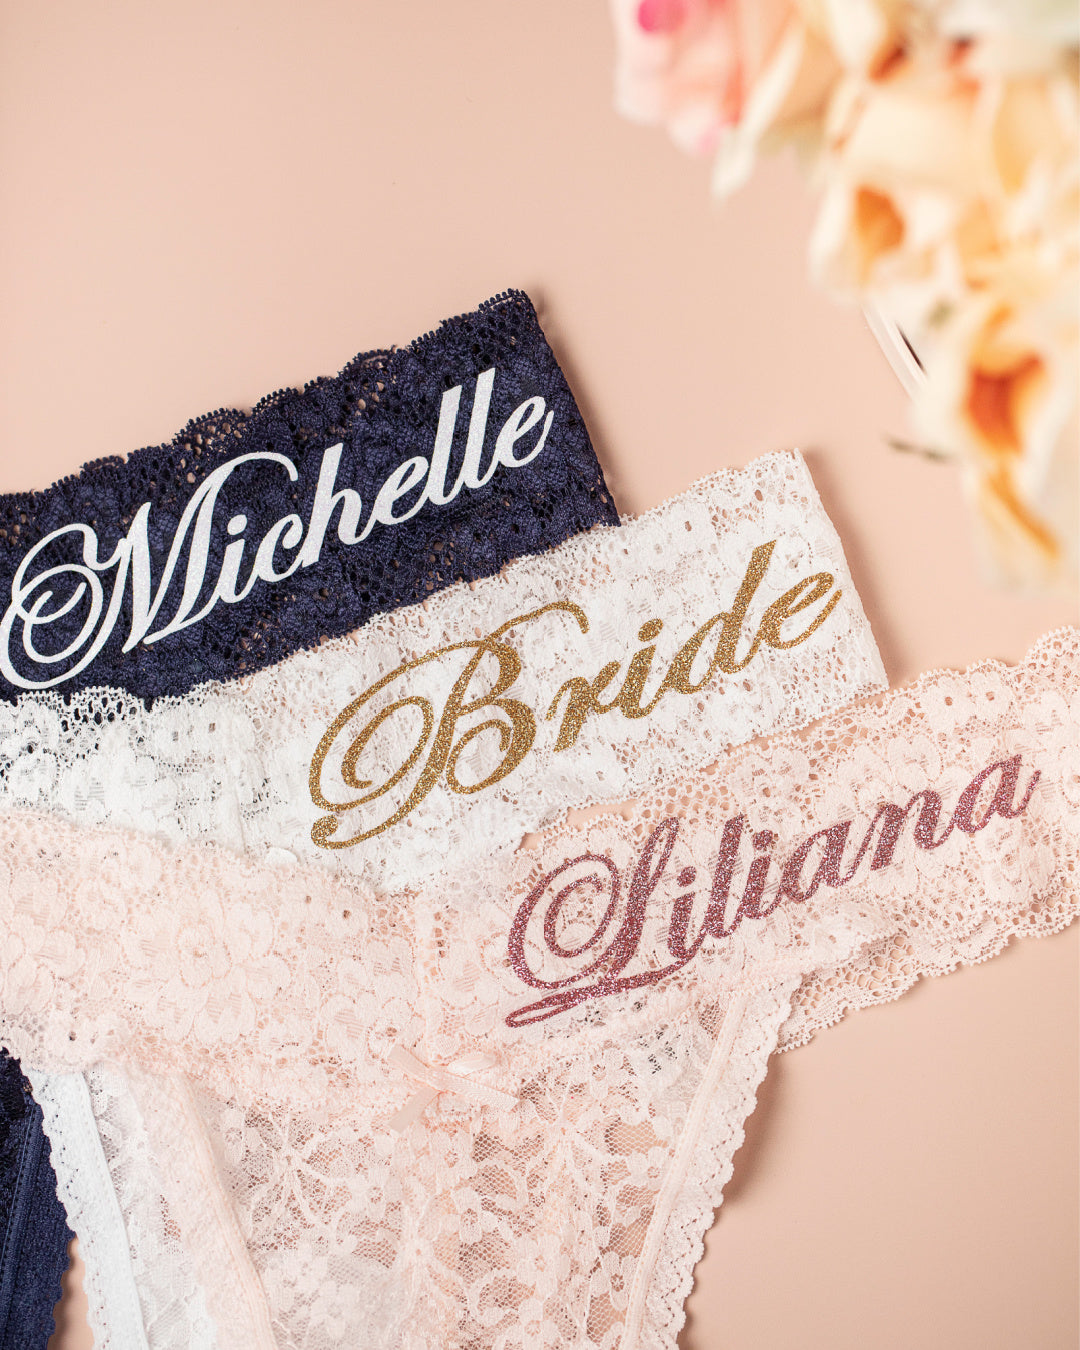 Personalized Lace thong, You choose your color Thong, Font, Thread Color,  Words or Name. Great Wedding or Personal Gift.